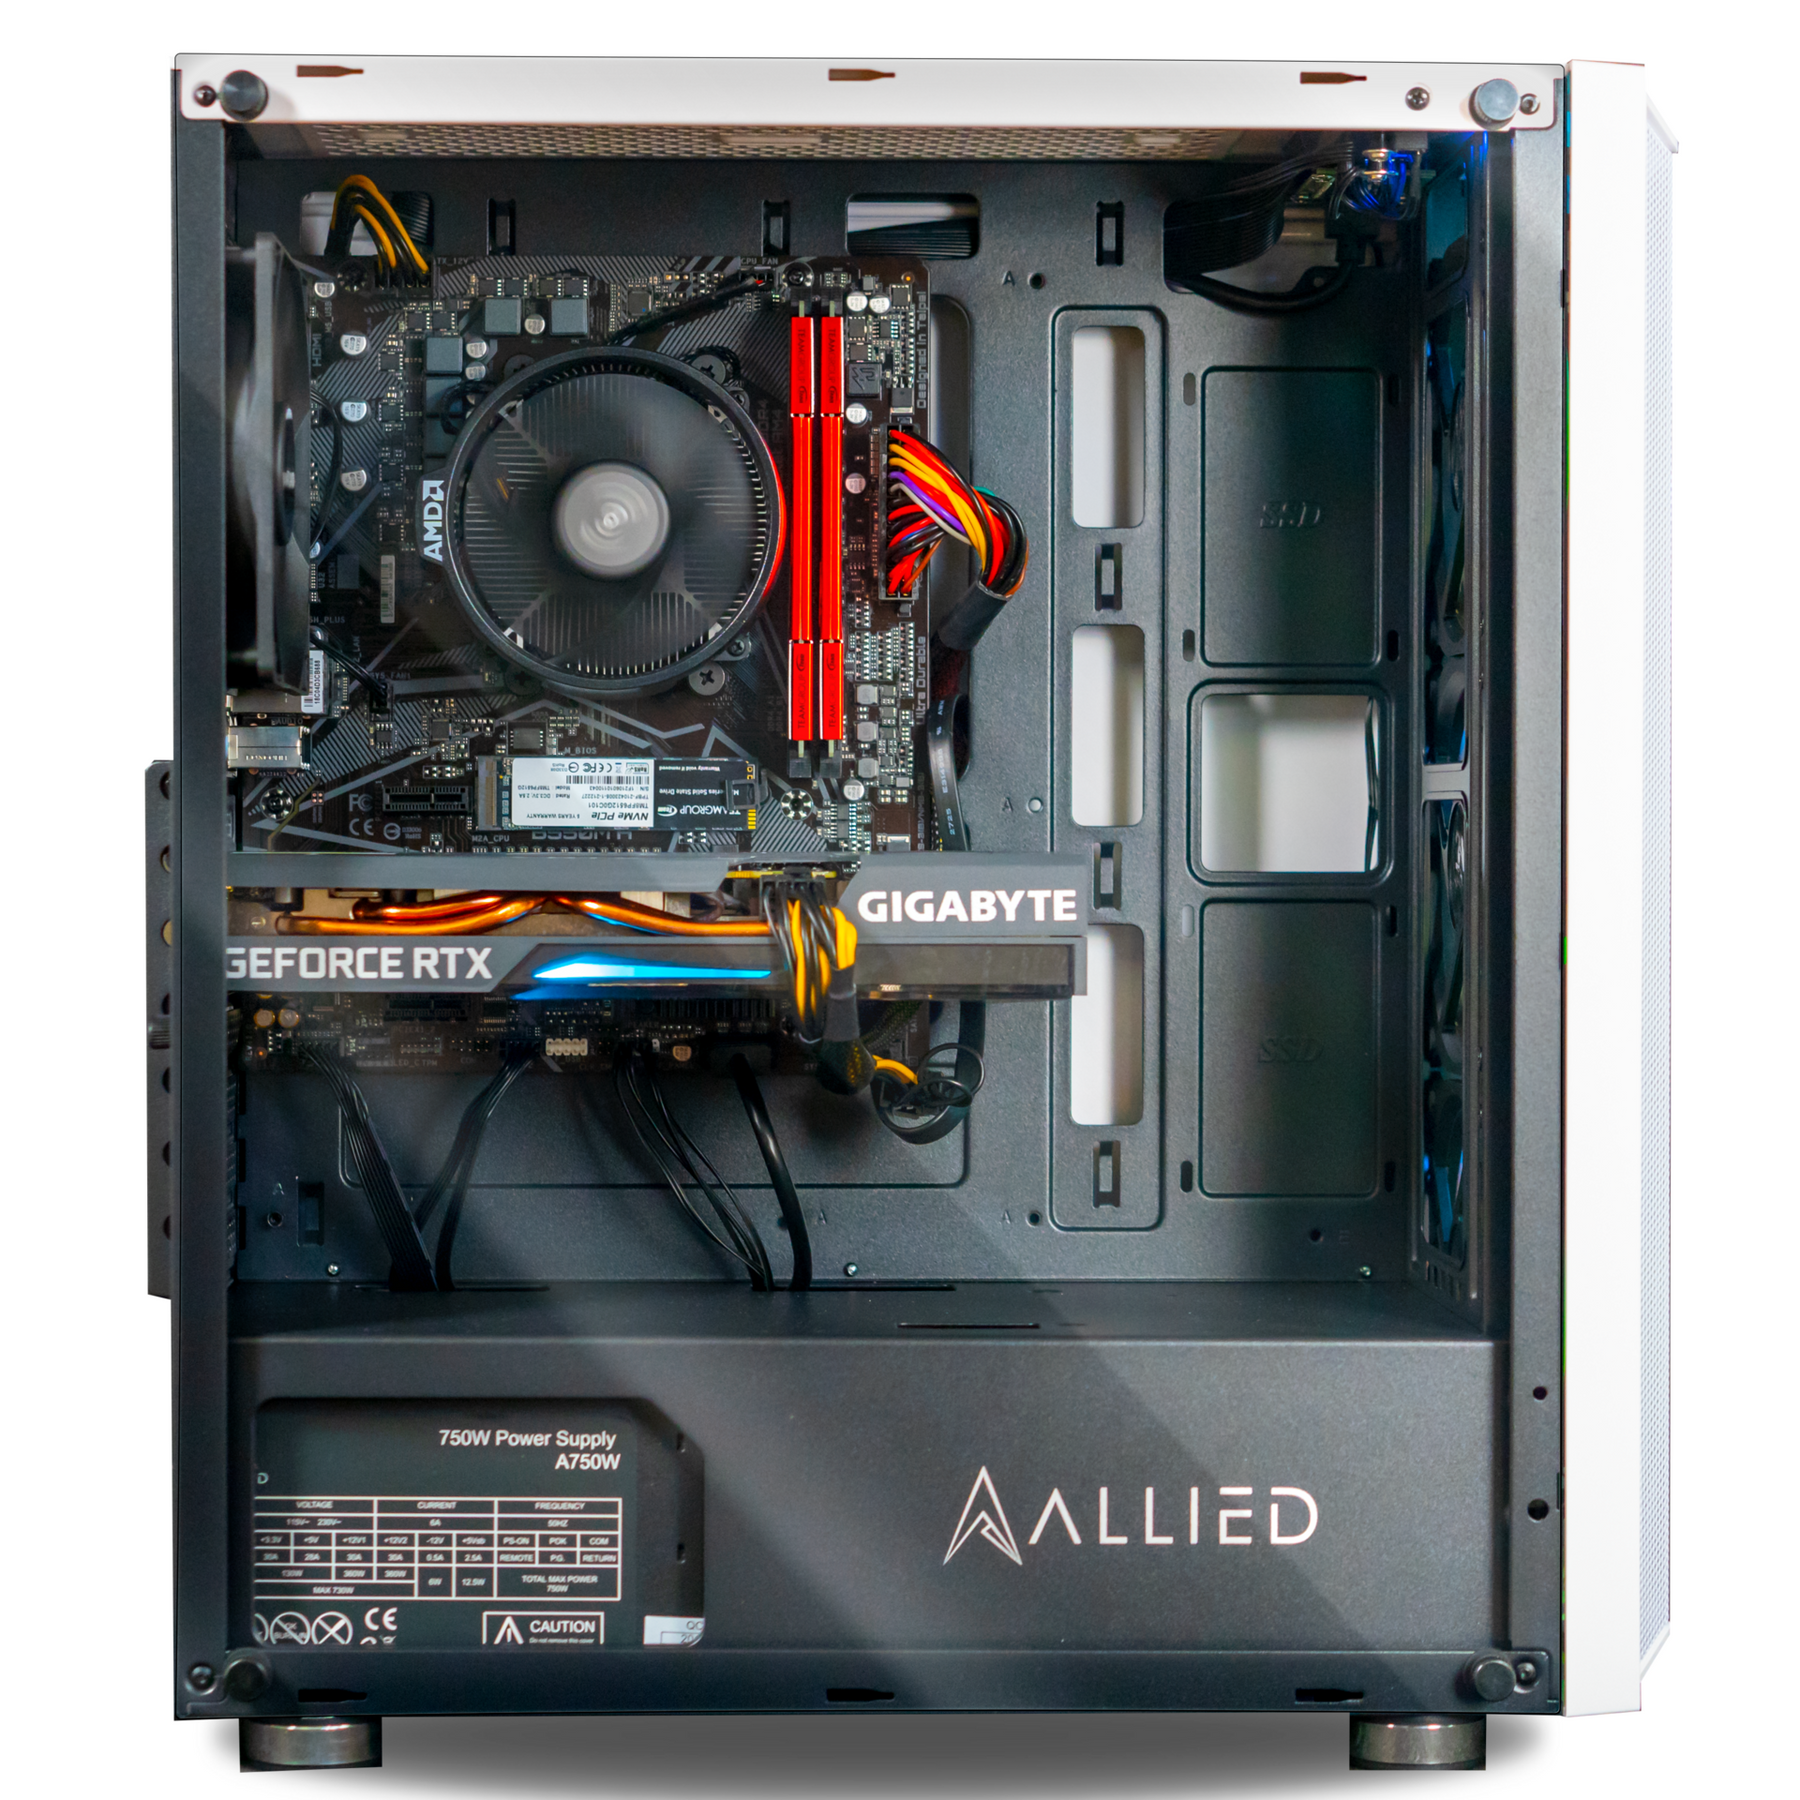 mikrocomputer Forskelle Evolve Allied Patriot-A: AMD Ryzen 5 2600 | Nvidia RTX 2060 Gaming PC